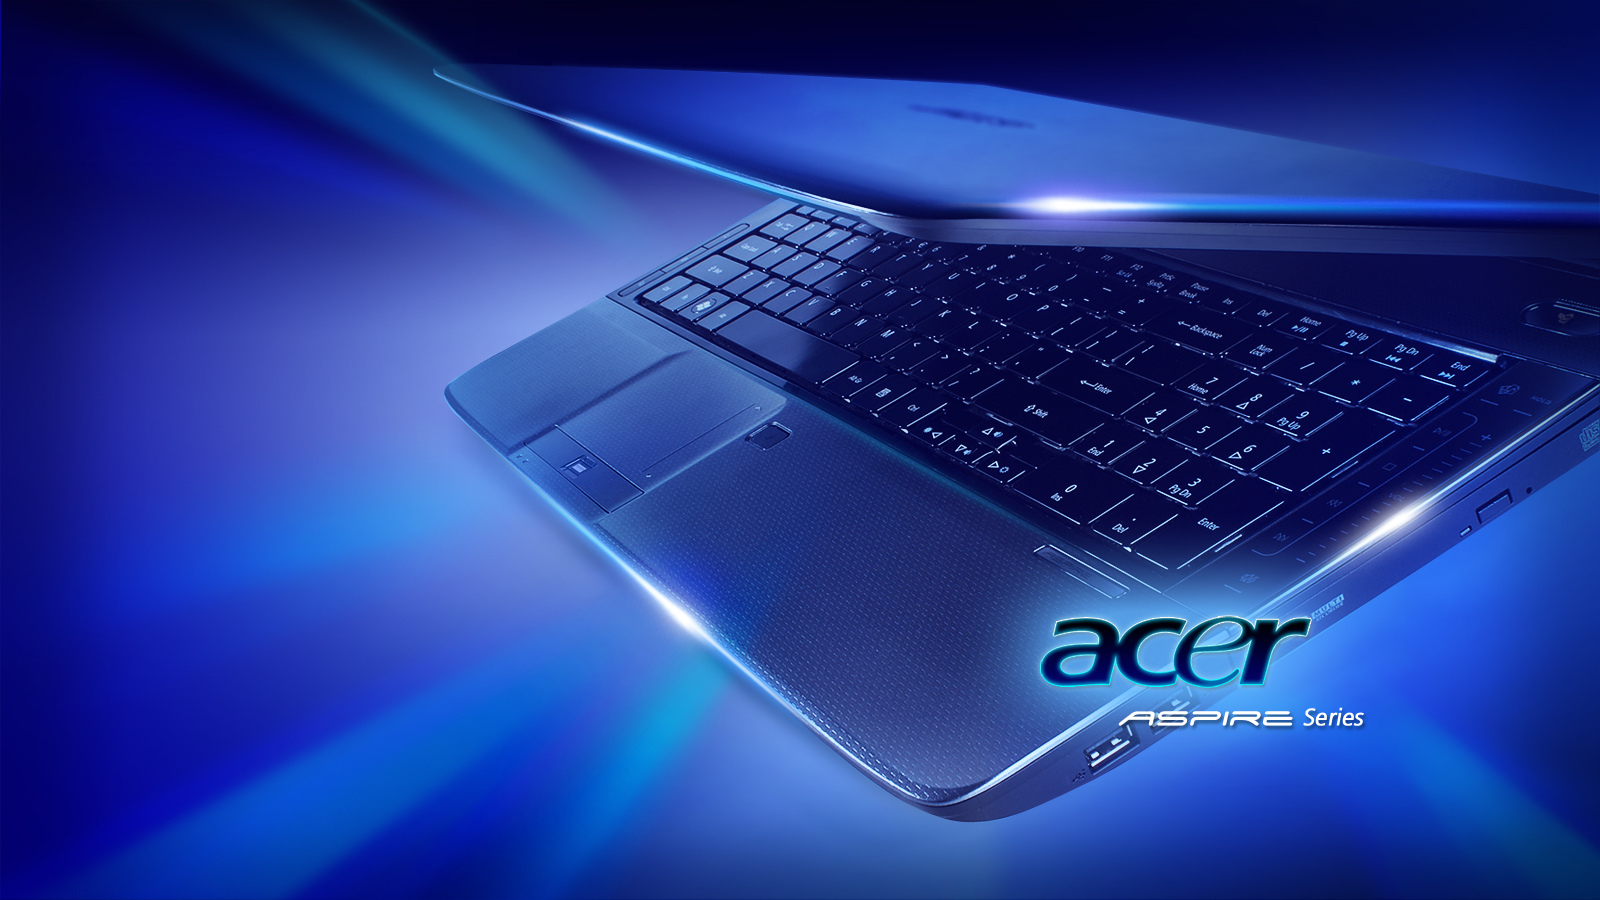 acer aspire wallpaper,blue,computer keyboard,laptop,technology,electronic device